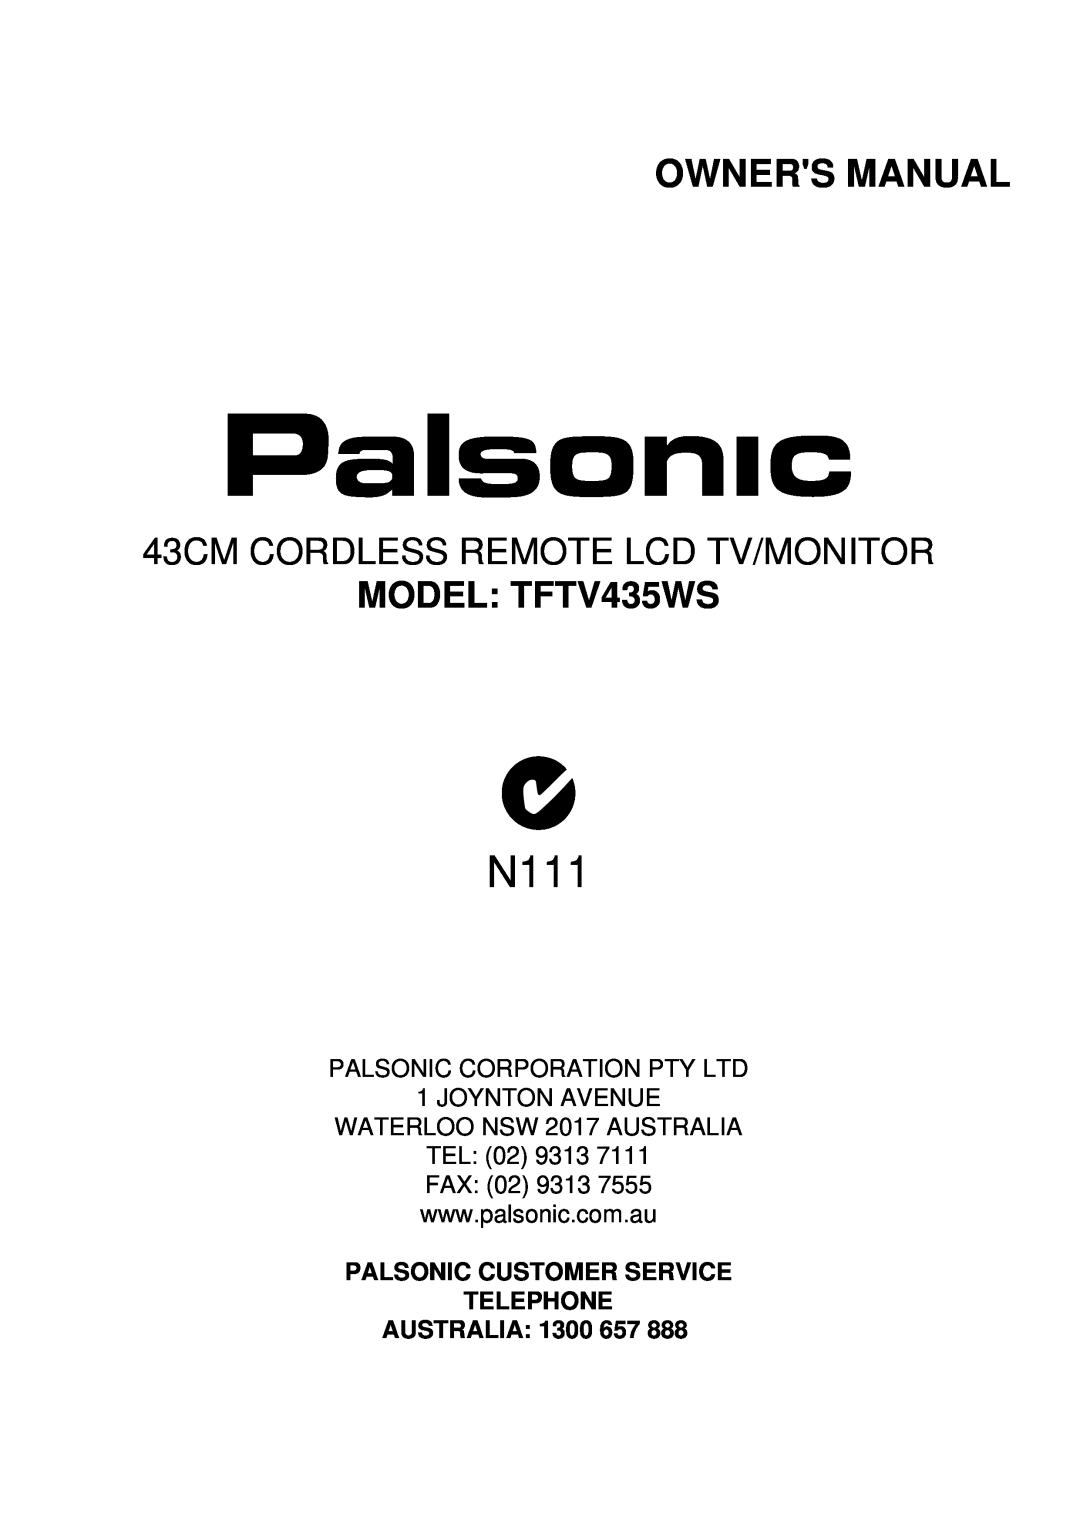 Palsonic owner manual N111, Owners Manual, 43CM CORDLESS REMOTE LCD TV/MONITOR, MODEL TFTV435WS 